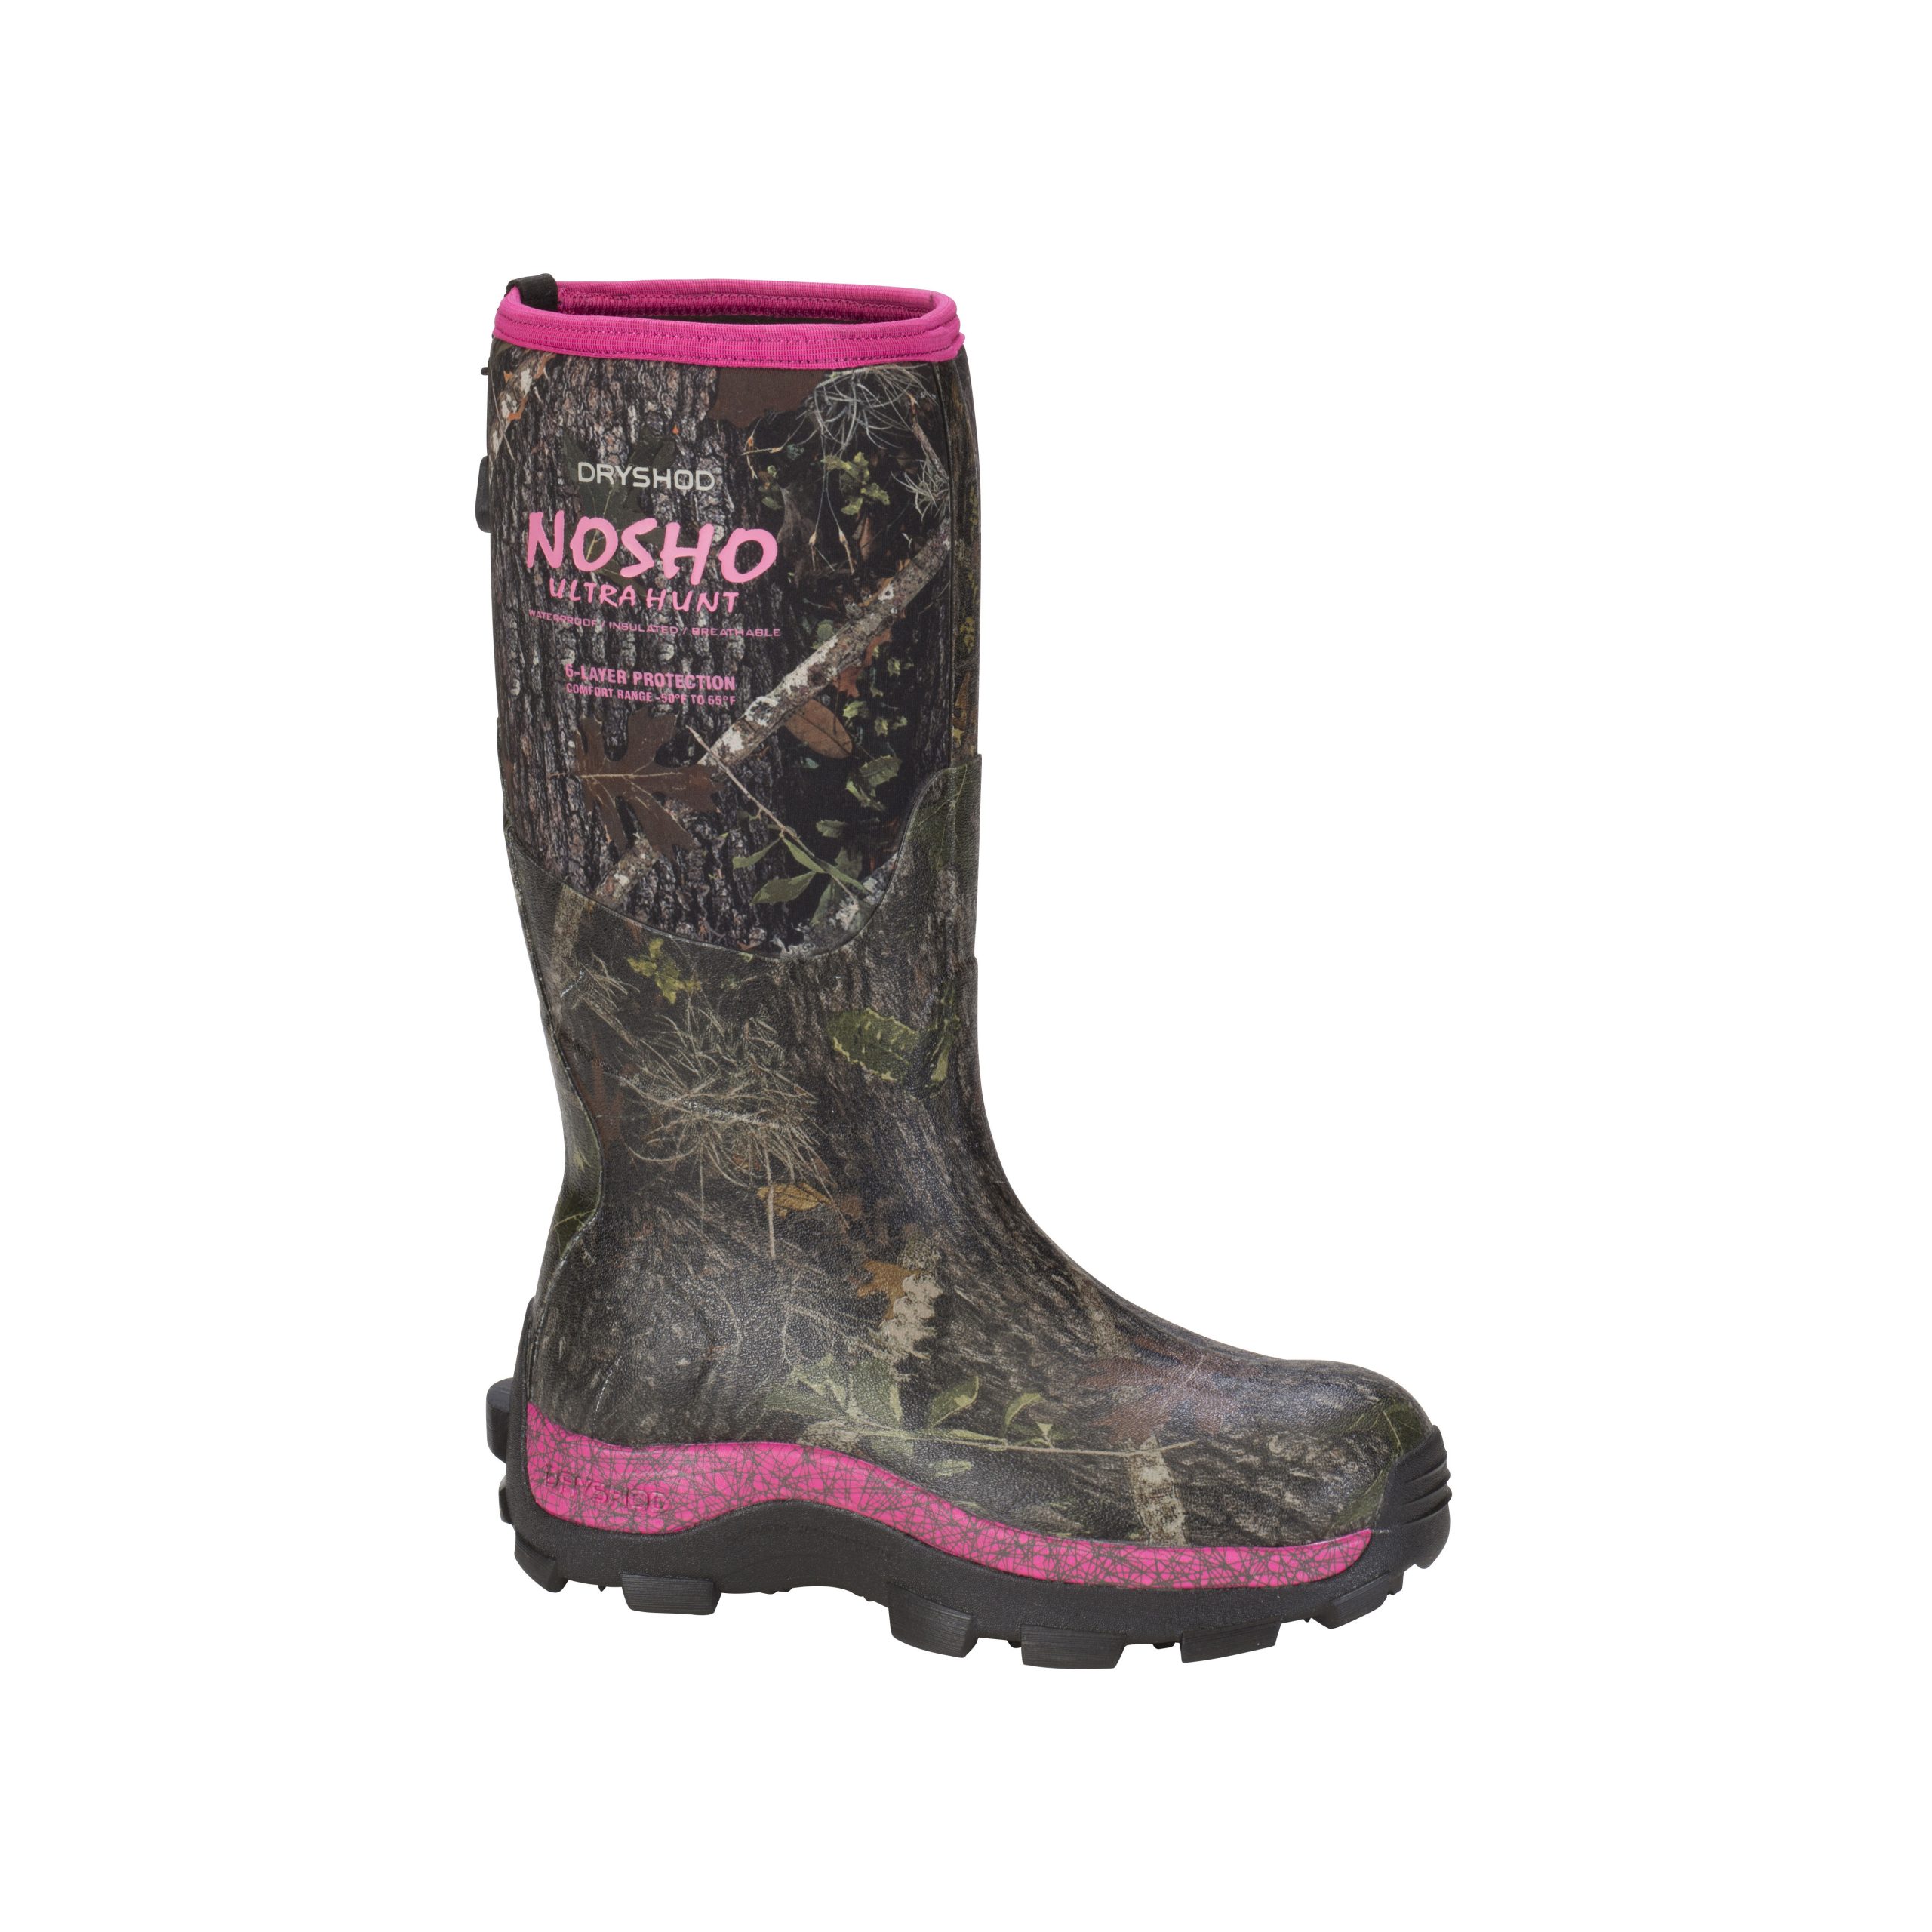 PC/タブレット PC周辺機器 Women's Dry Shod NoSho Ultra Hunt Camo Extreme Cold Conditions Boot  MBM-WH-PN Pink Camo